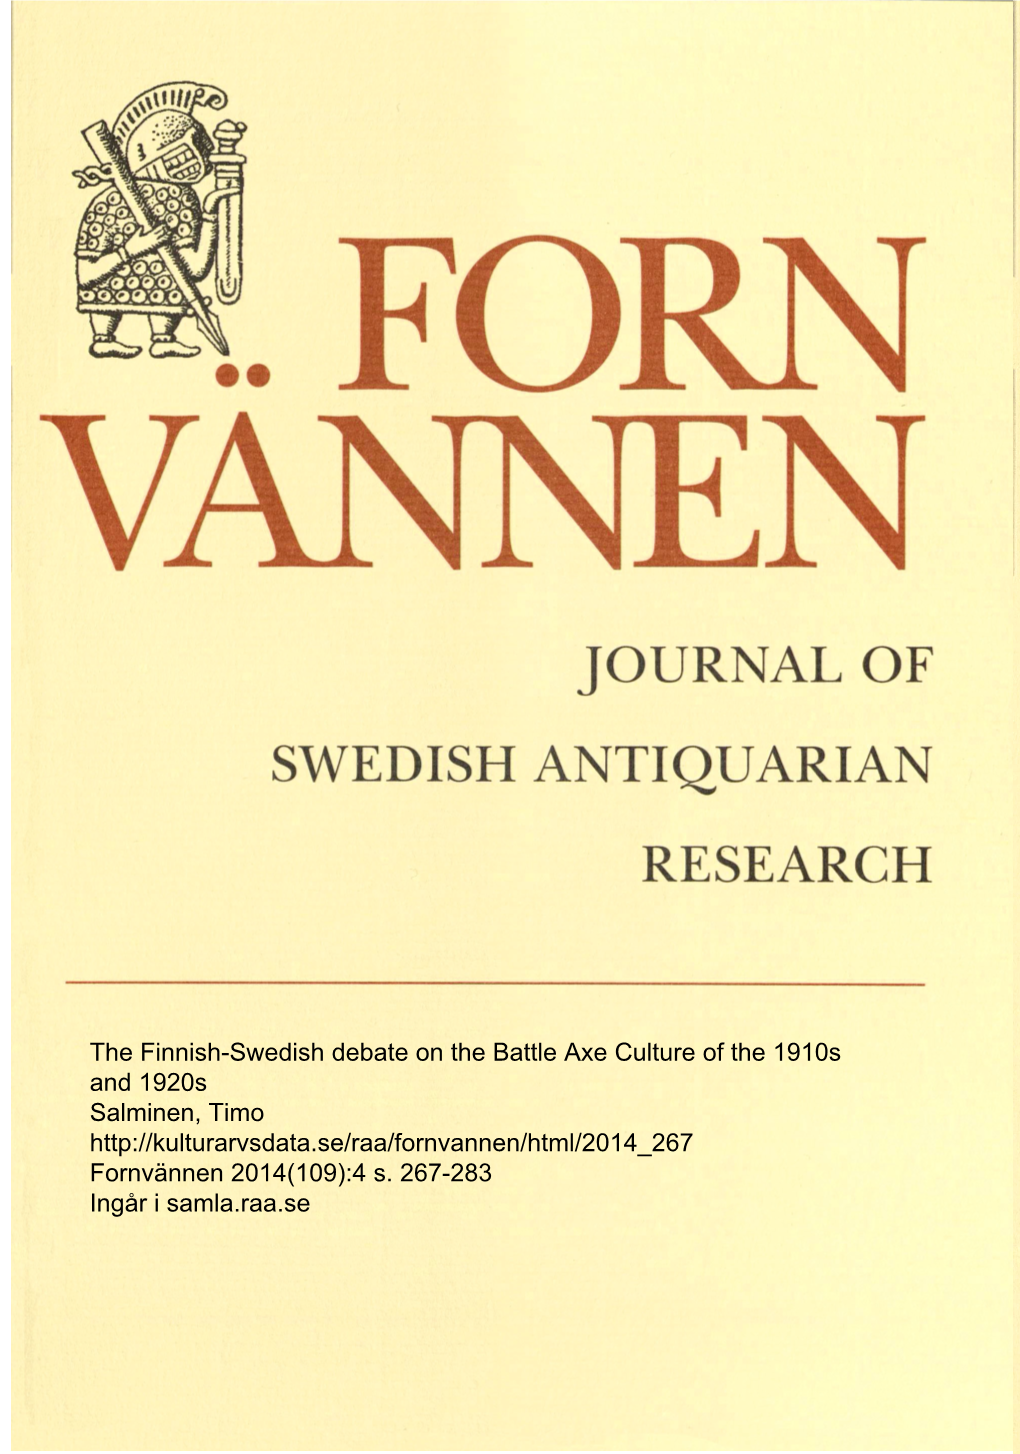 The Finnish-Swedish Debate on the Battle Axe Culture of the 1910S And